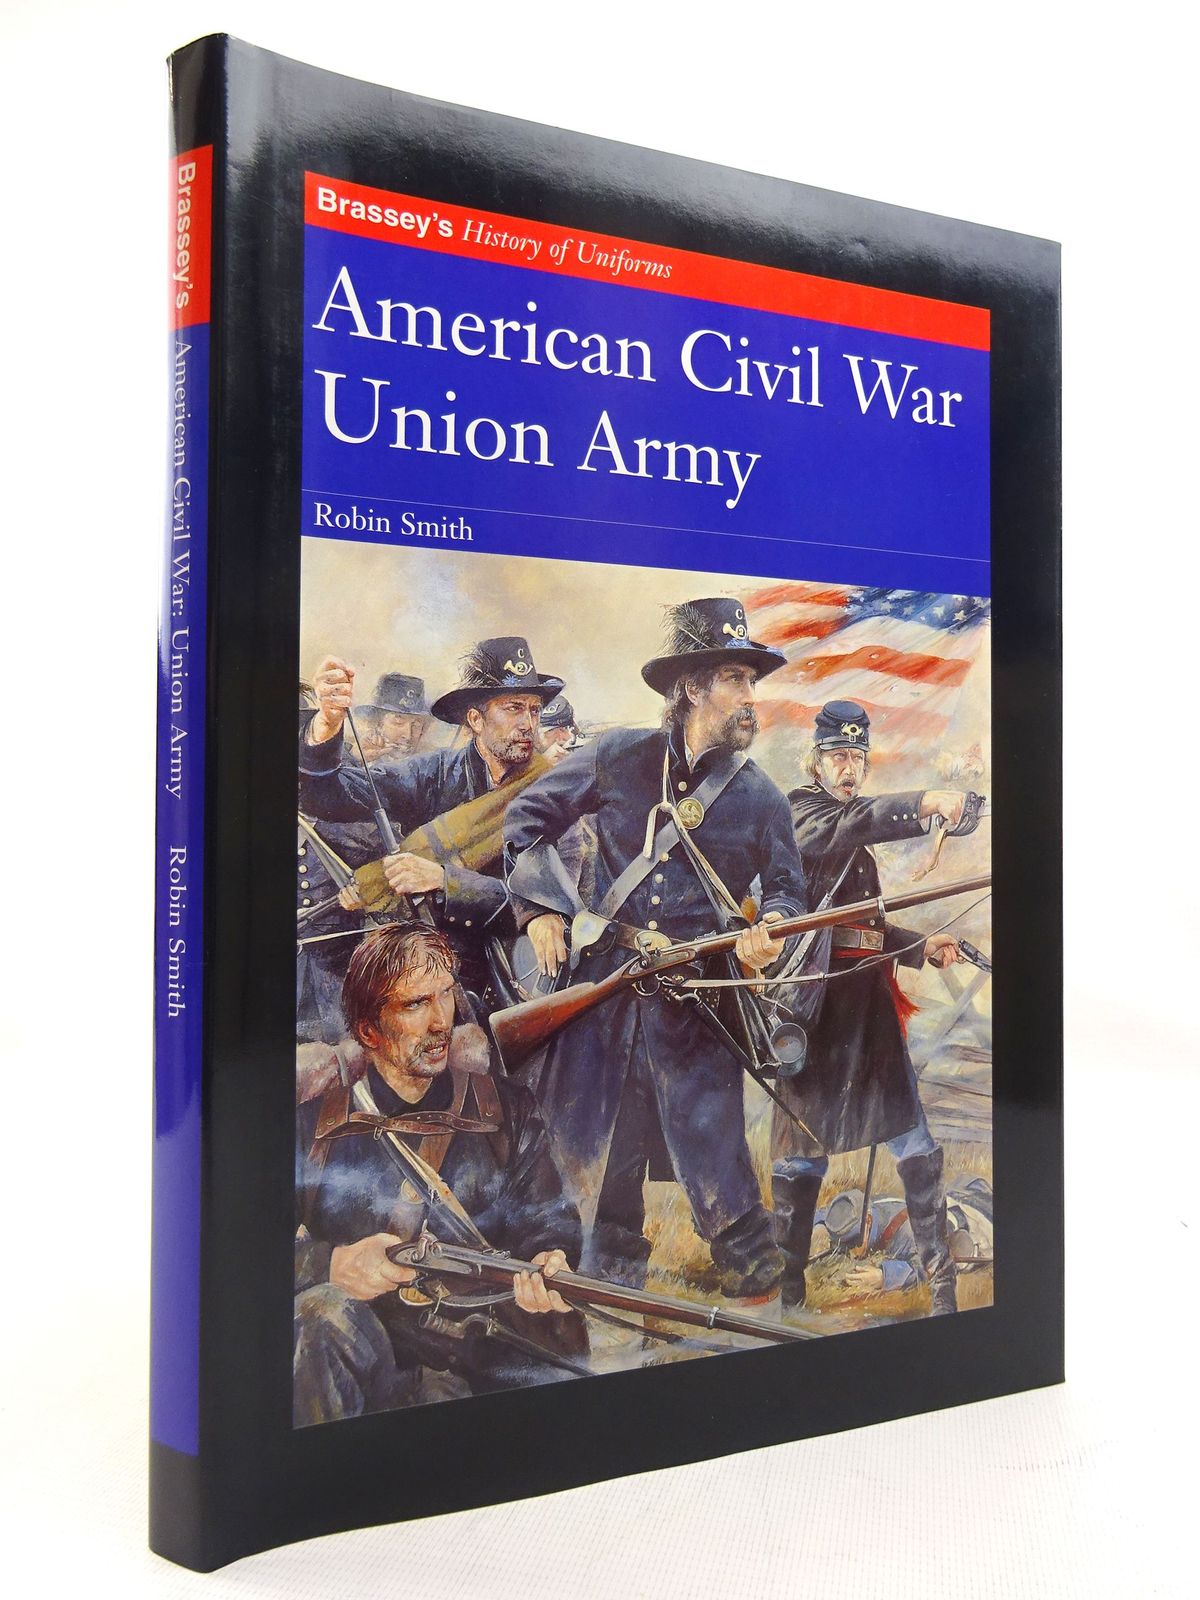 Photo of AMERICAN CIVIL WAR UNION ARMY written by Smith, Robin illustrated by Collingwood, Chris published by Brassey's (STOCK CODE: 1816014)  for sale by Stella & Rose's Books